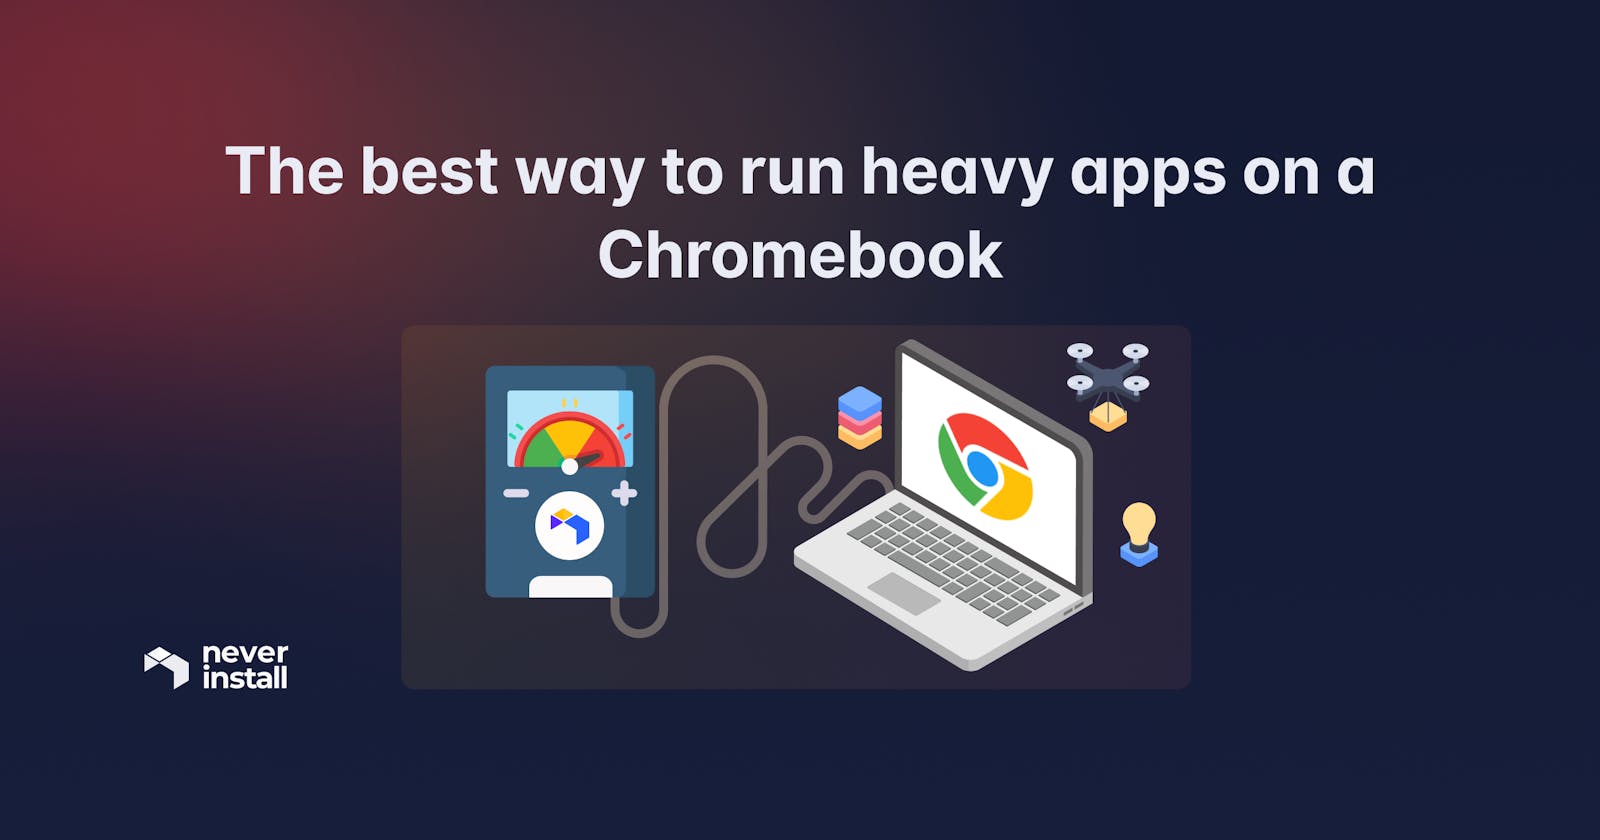 The best way to run heavy apps on a Chromebook